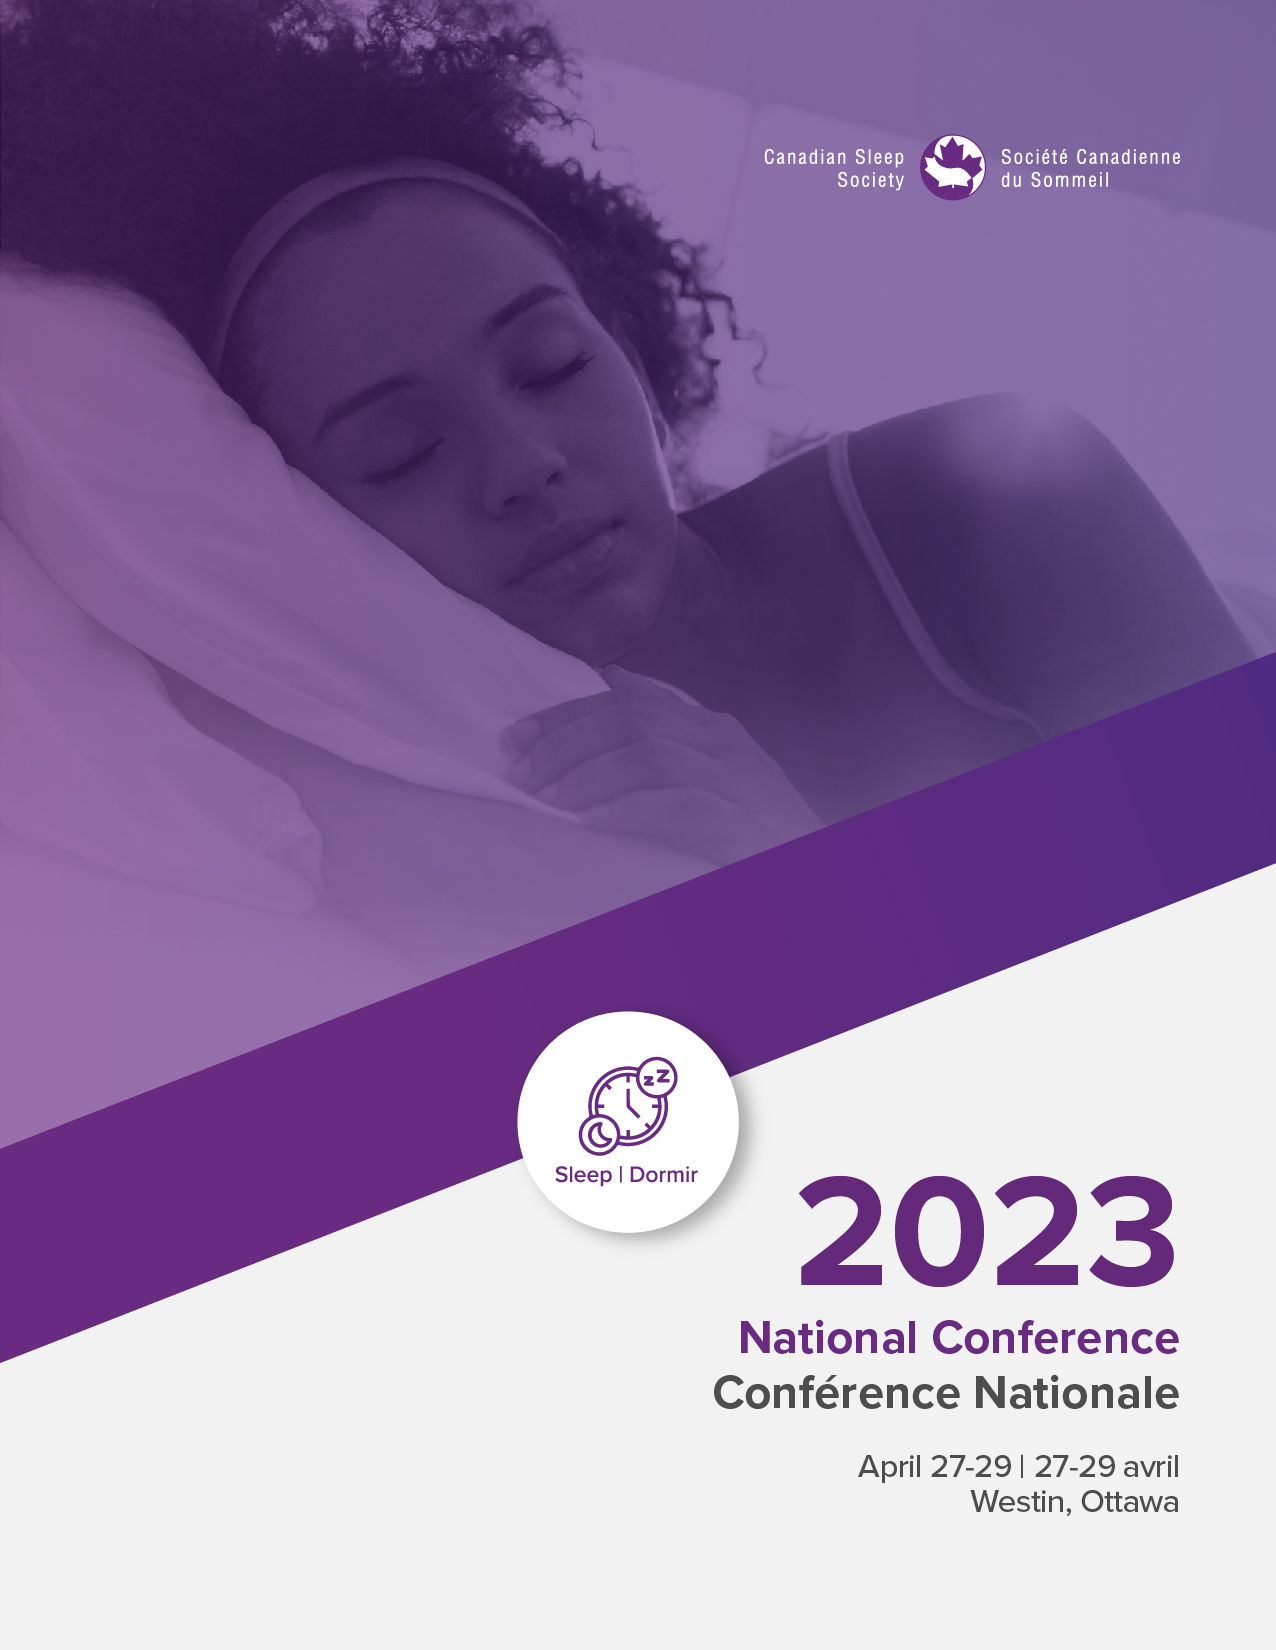 Save the date, April 27-29, National Conference 2023, Westin Ottawa